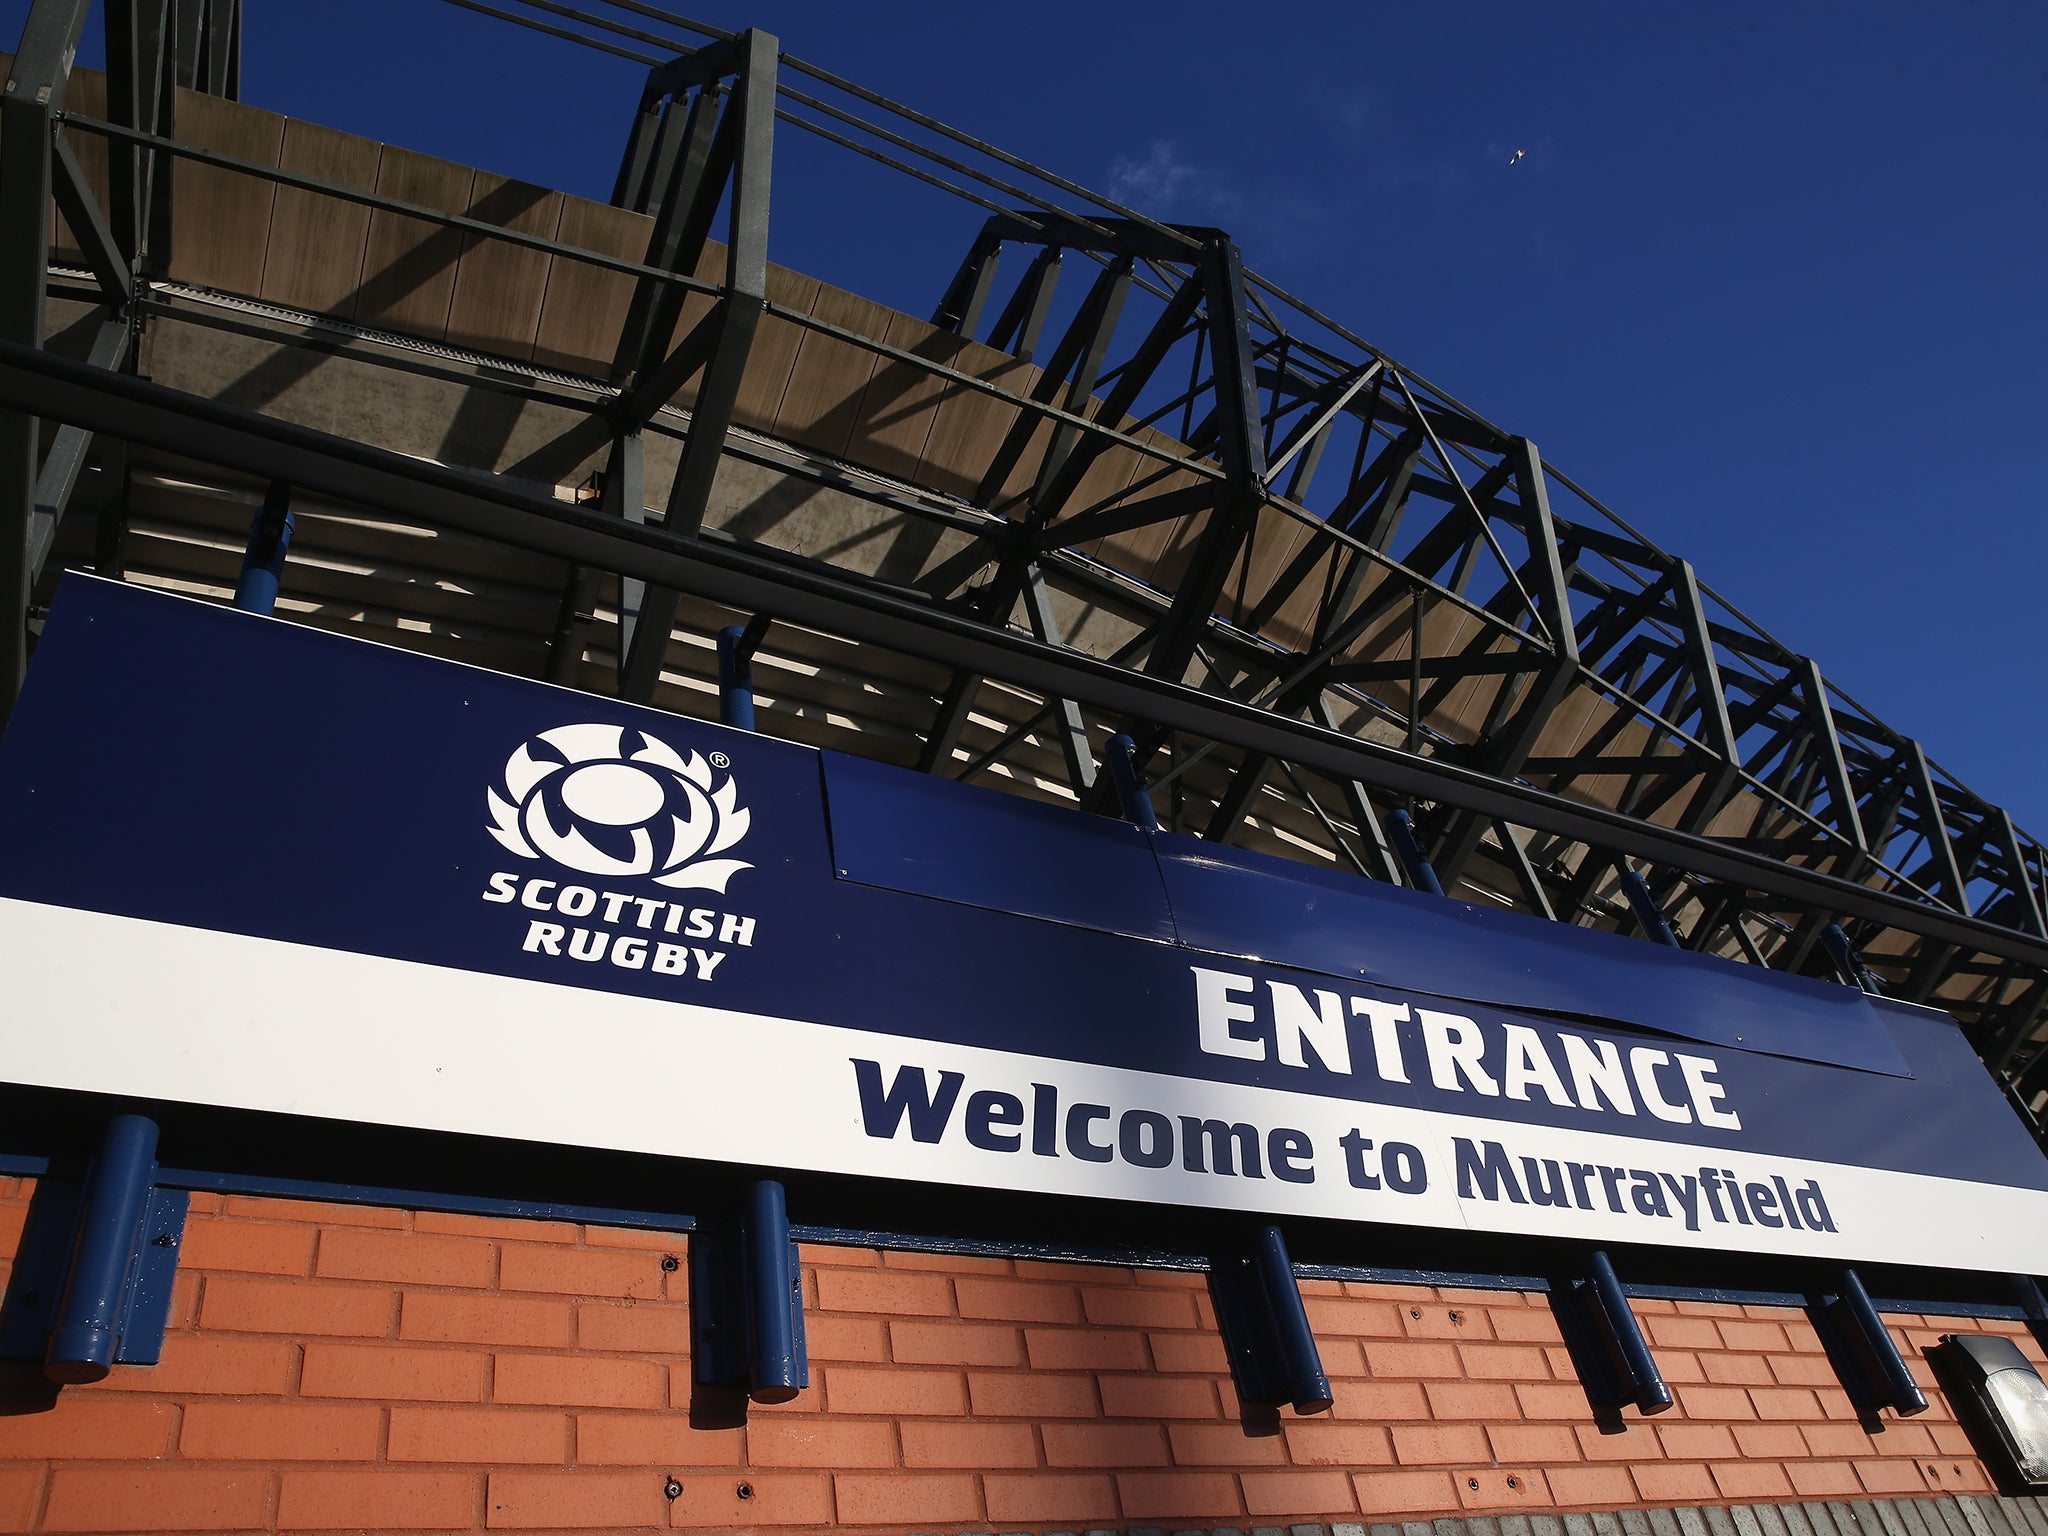 The Scottish Rugby Union has handed out a total of 347 weeks of bans over the initiation ceremony